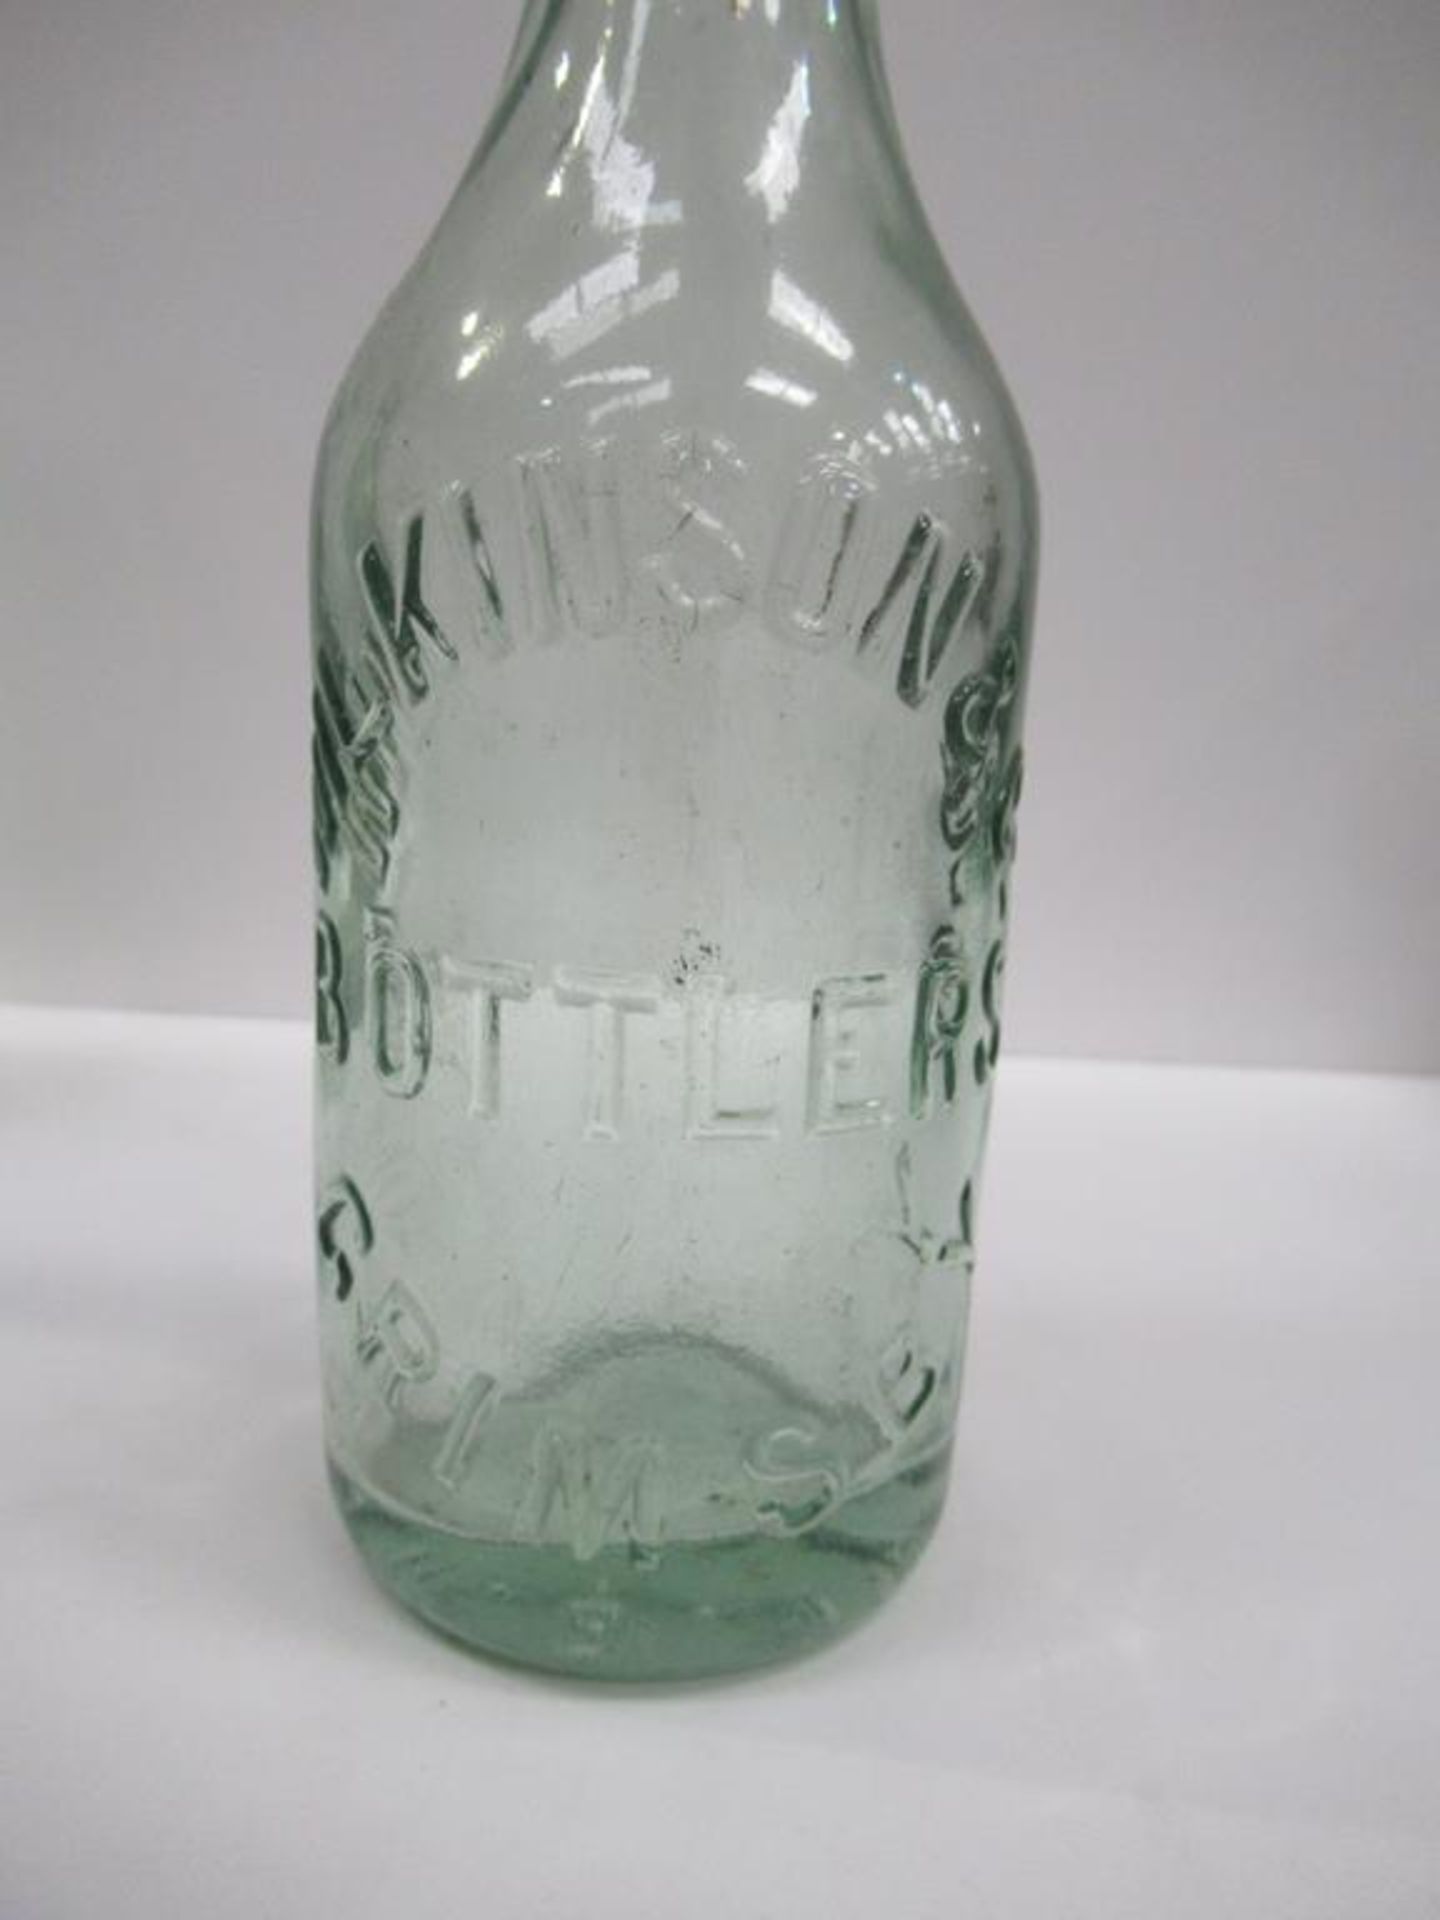 4x Grimsby (3x Scunthorpe) Wilkinsons & Co. bottles - Image 7 of 14